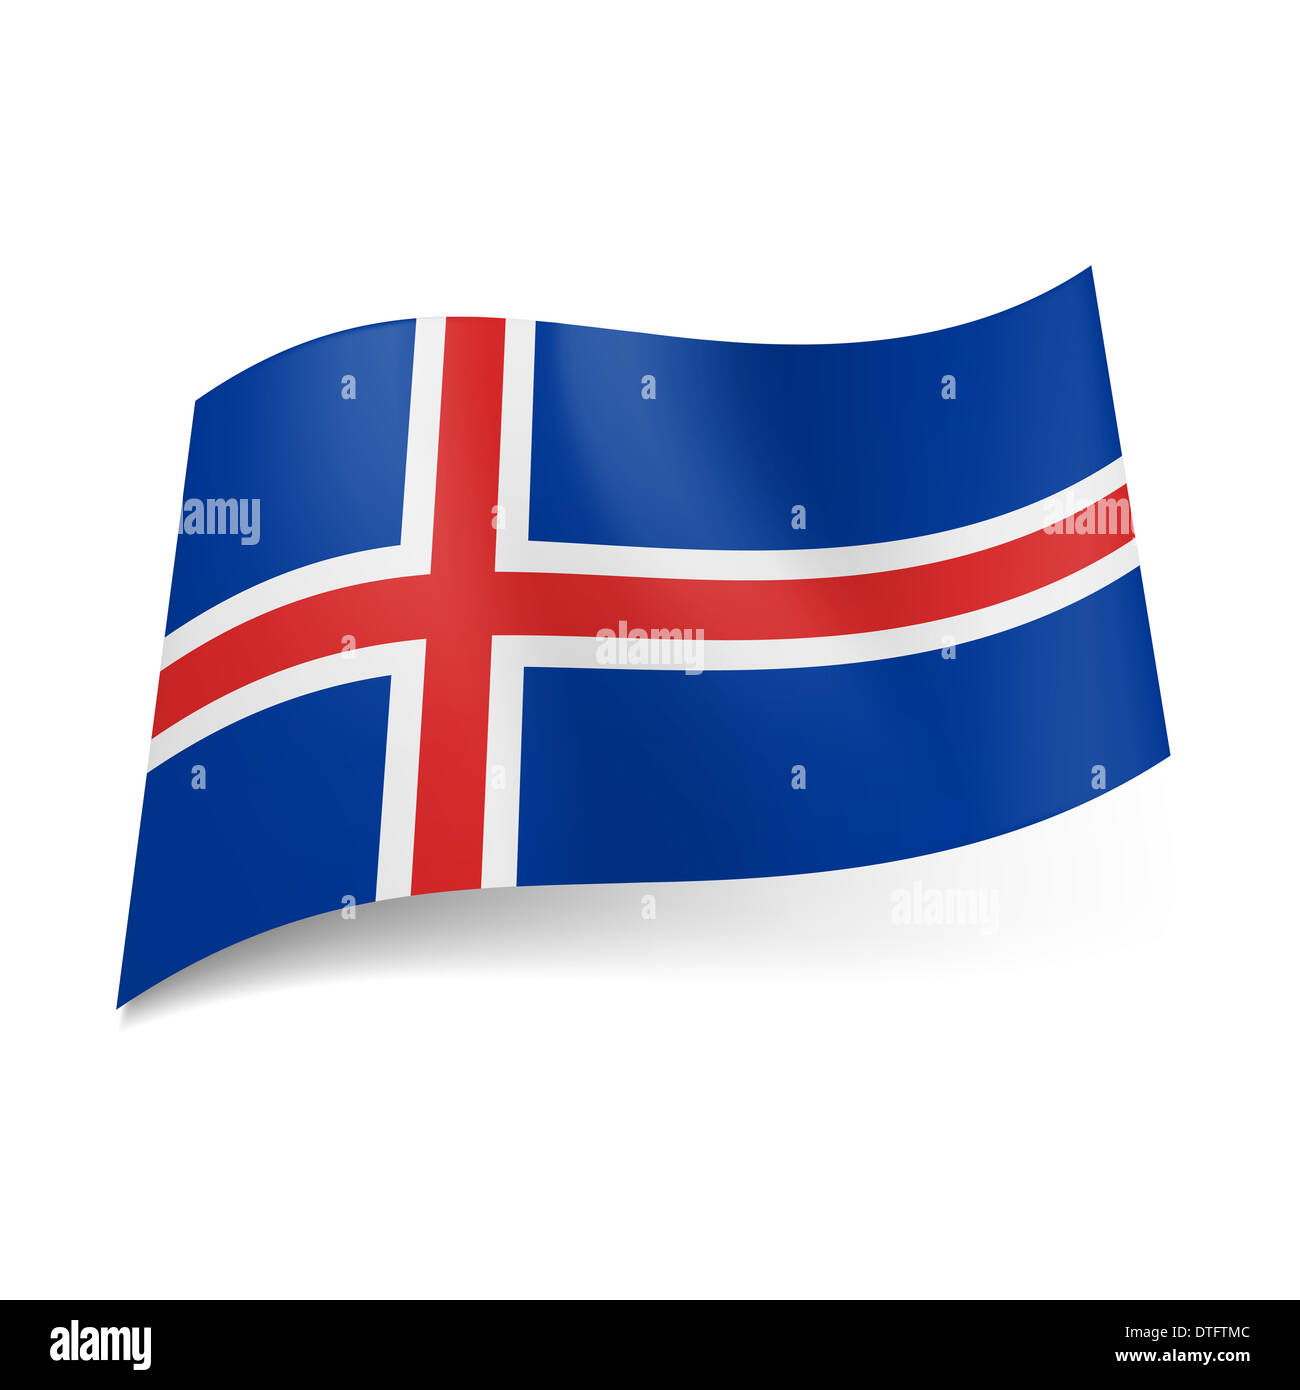 National flag of Iceland: white bordered red cross on blue background - Alamy